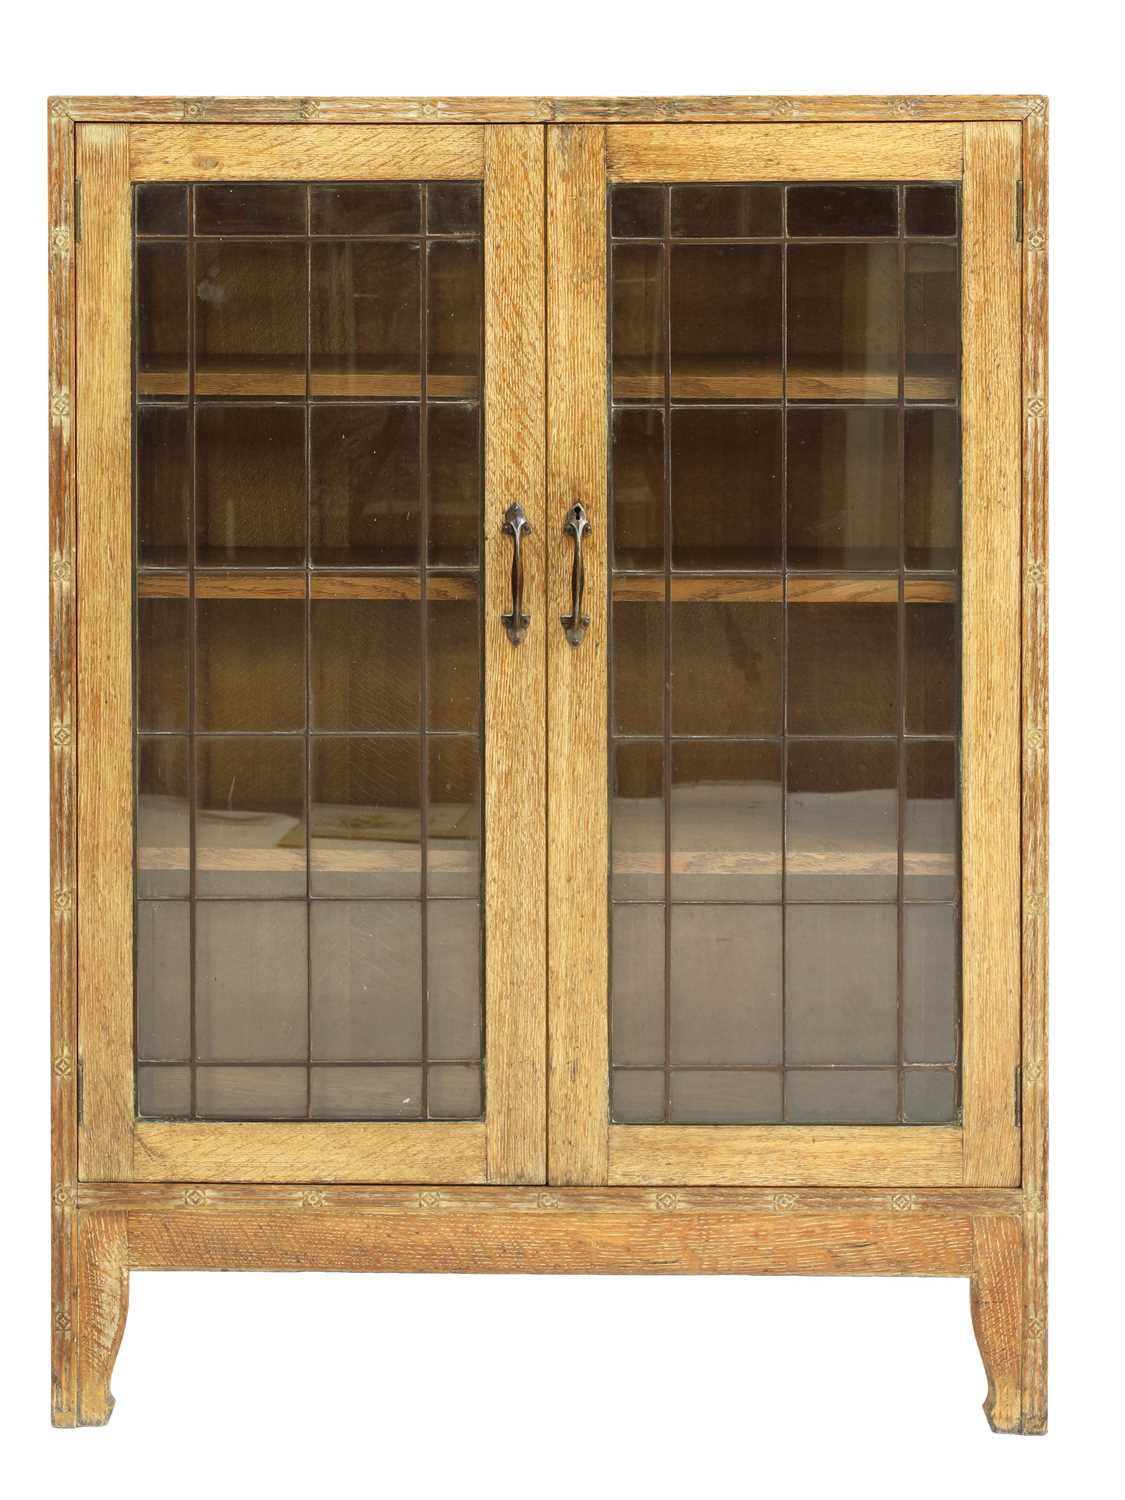 Lot 134 - An Arts and Crafts oak glazed bookcase